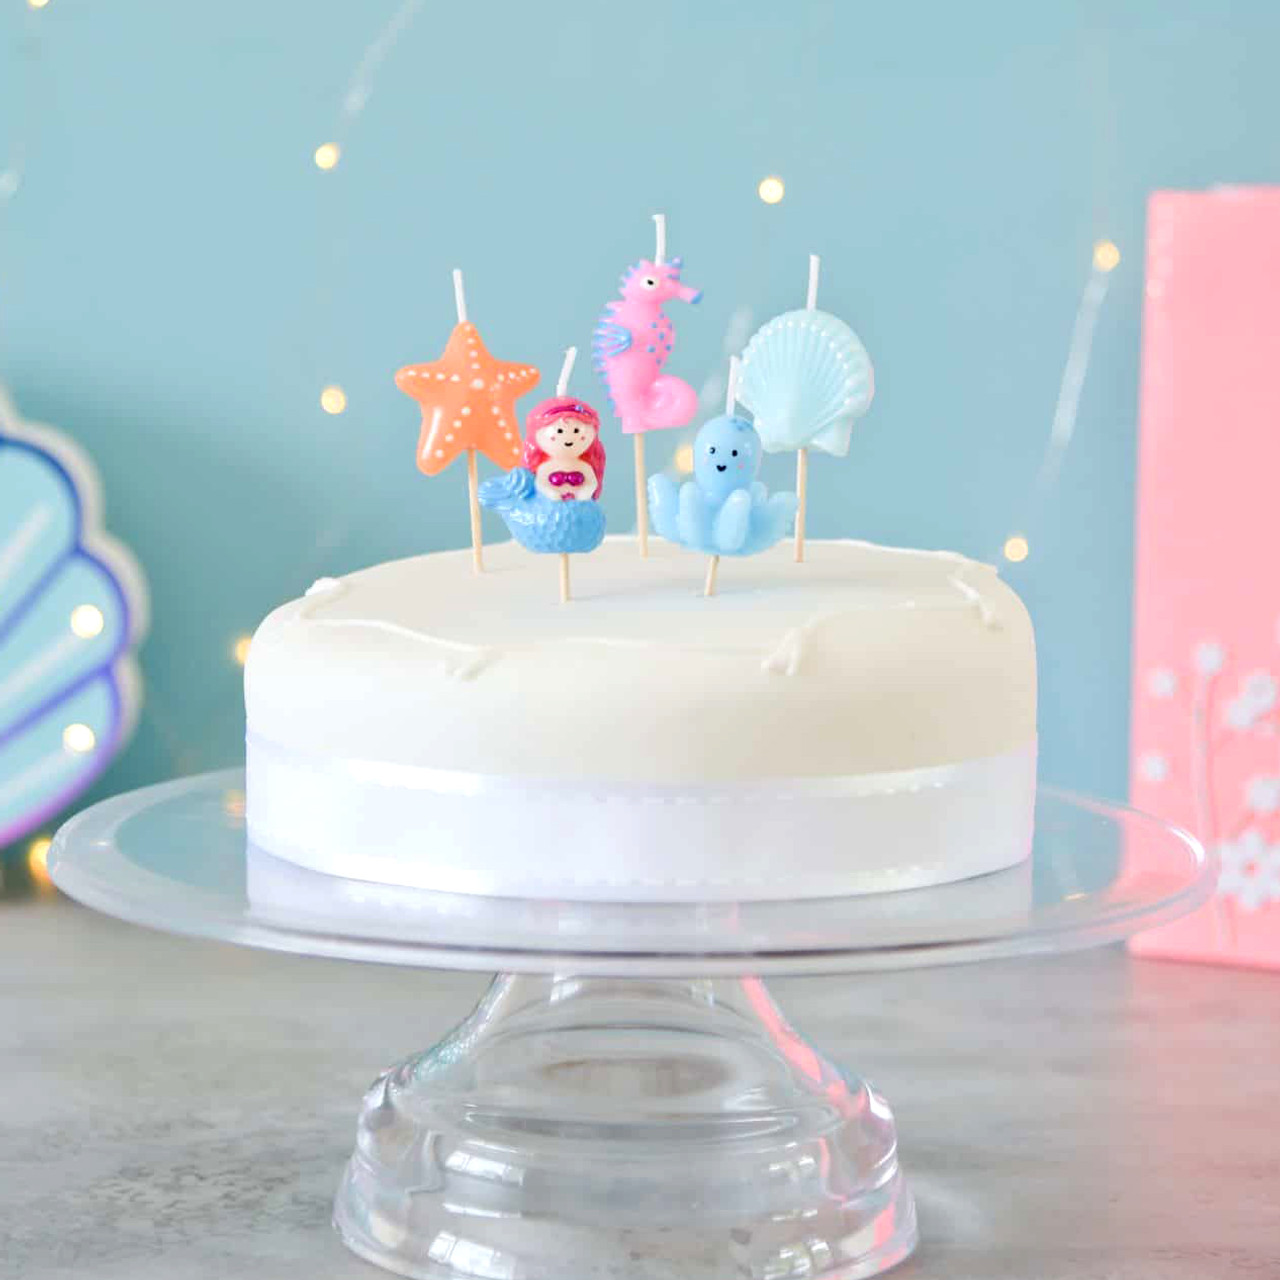 Under The Sea Themed Birthday Party Cake Candles